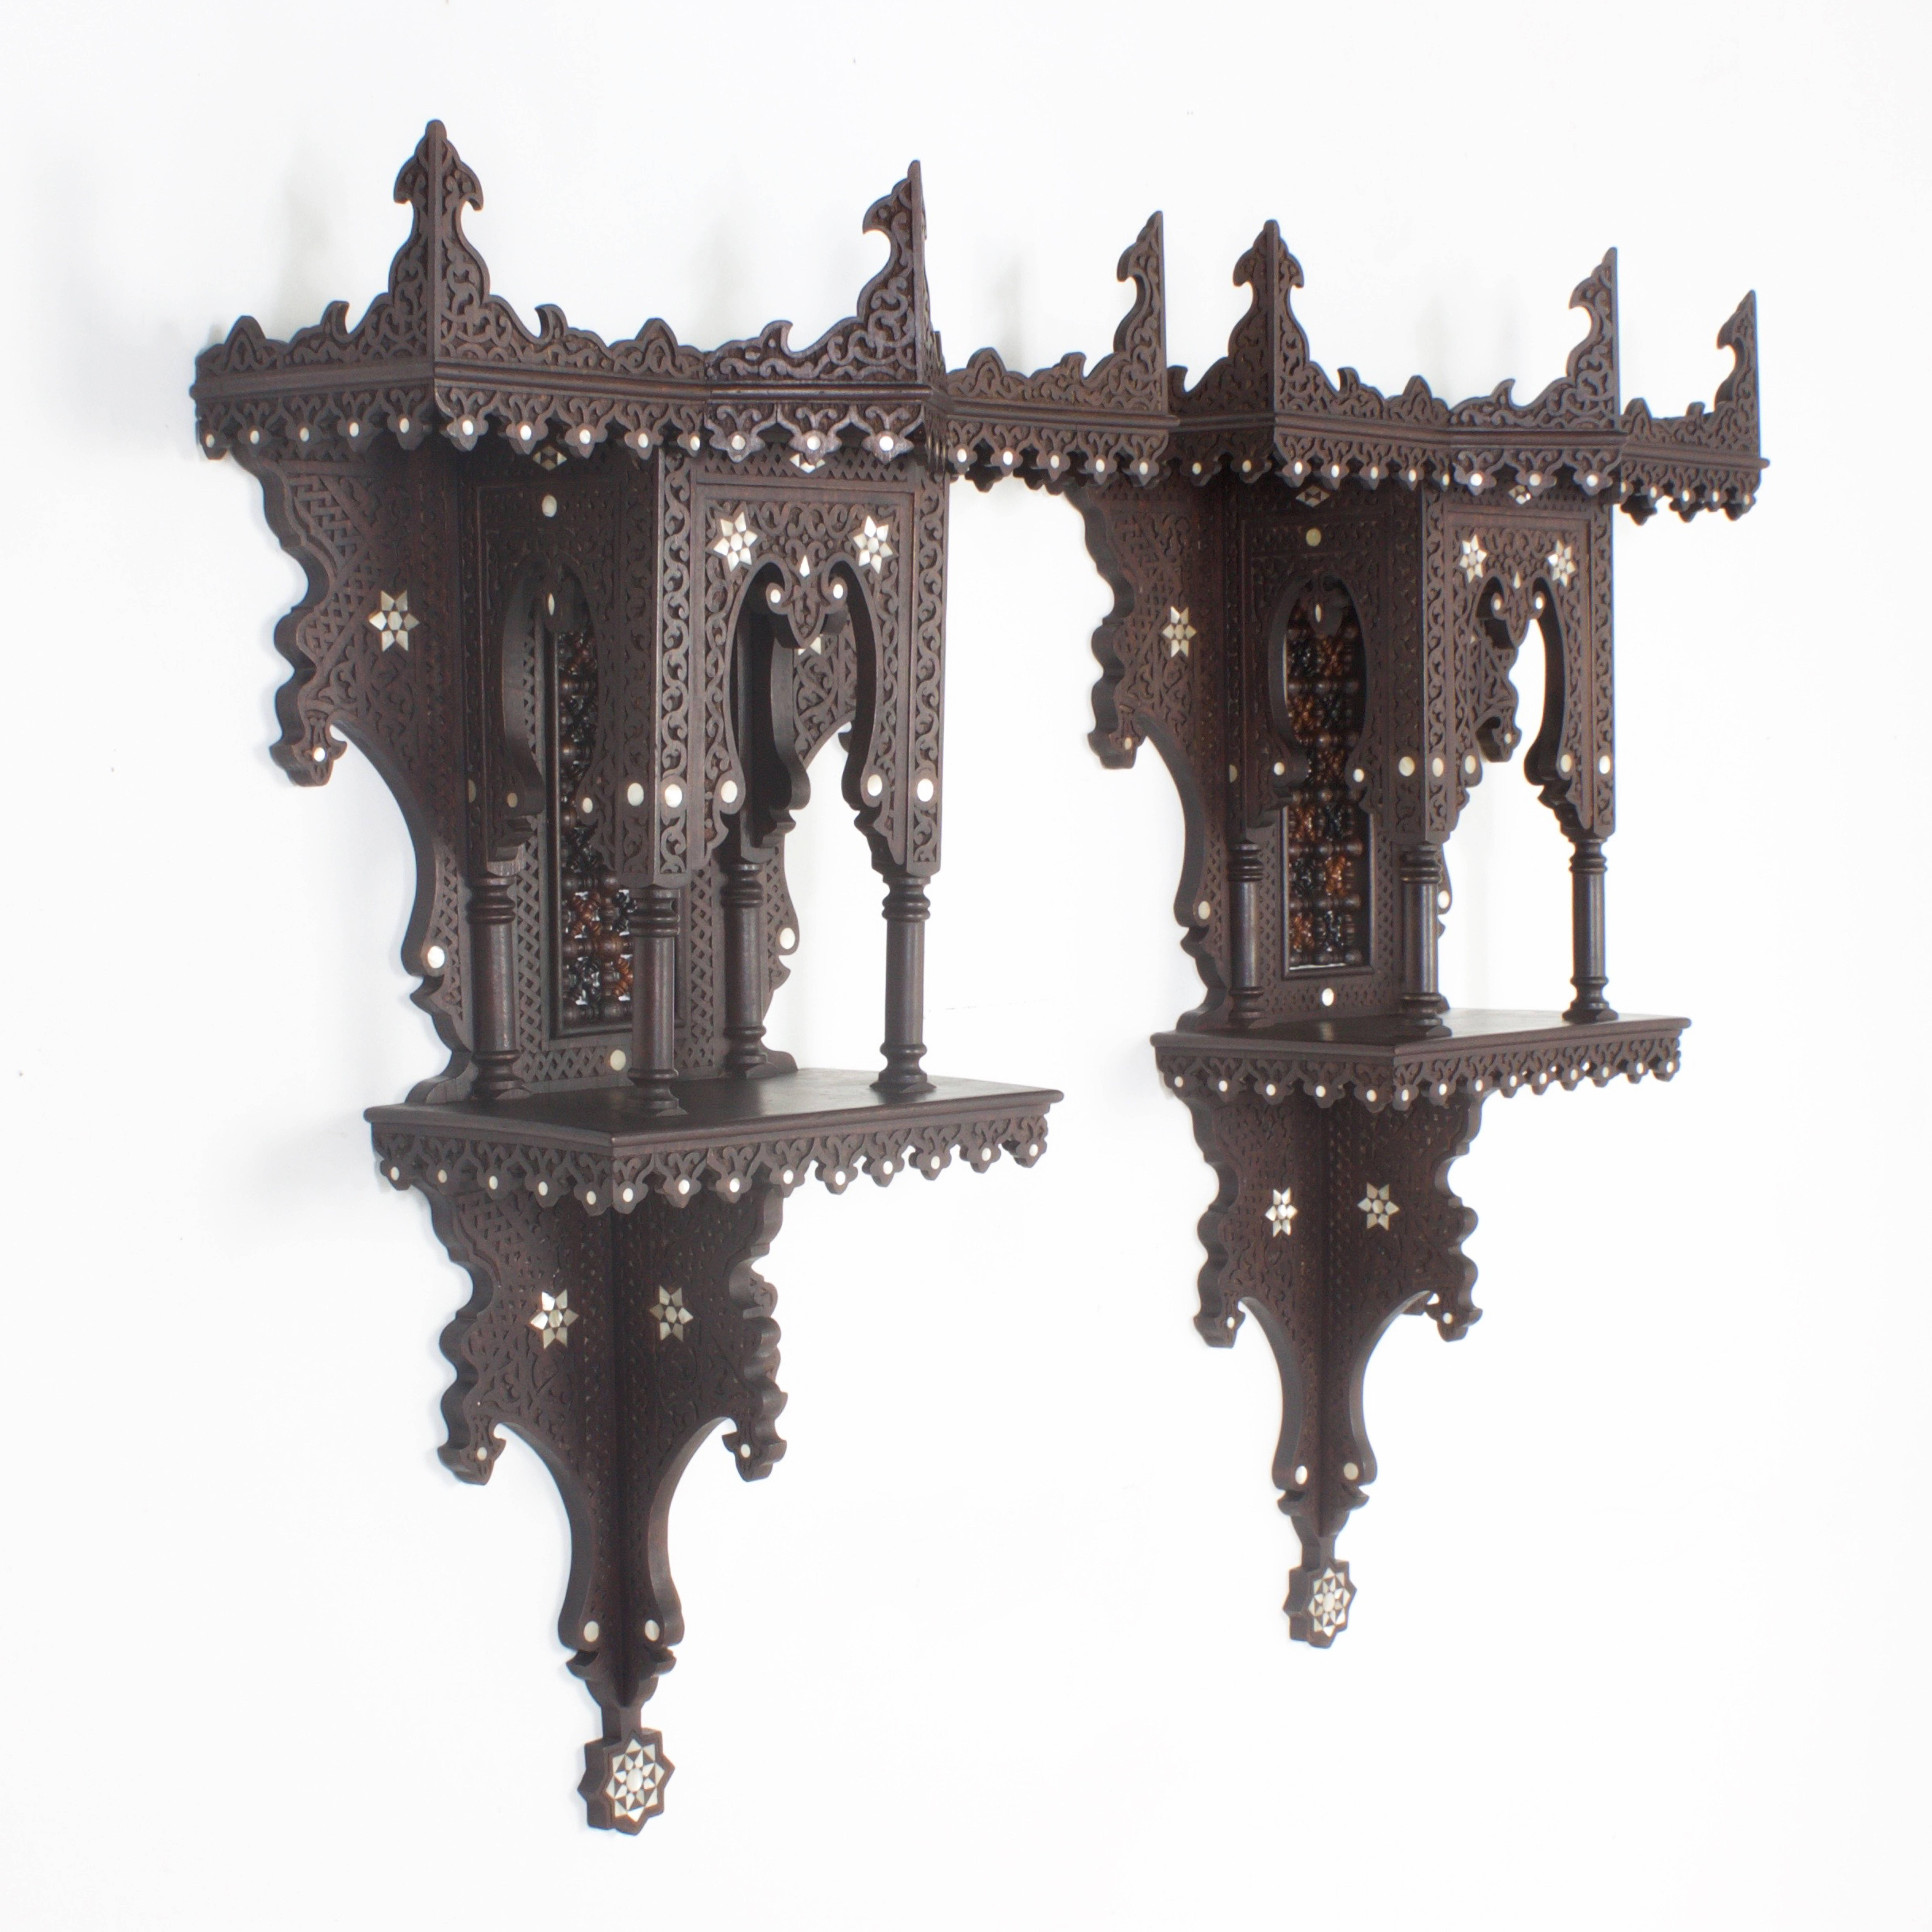 Rare pair of Moroccan or Syrian wall brackets with geometric and floral carvings highlighted by inlaid mother-of-pearl dots and stars. These exotic brackets have a scalloped crown on top. A middle section that is a shadow box backed by a stick and